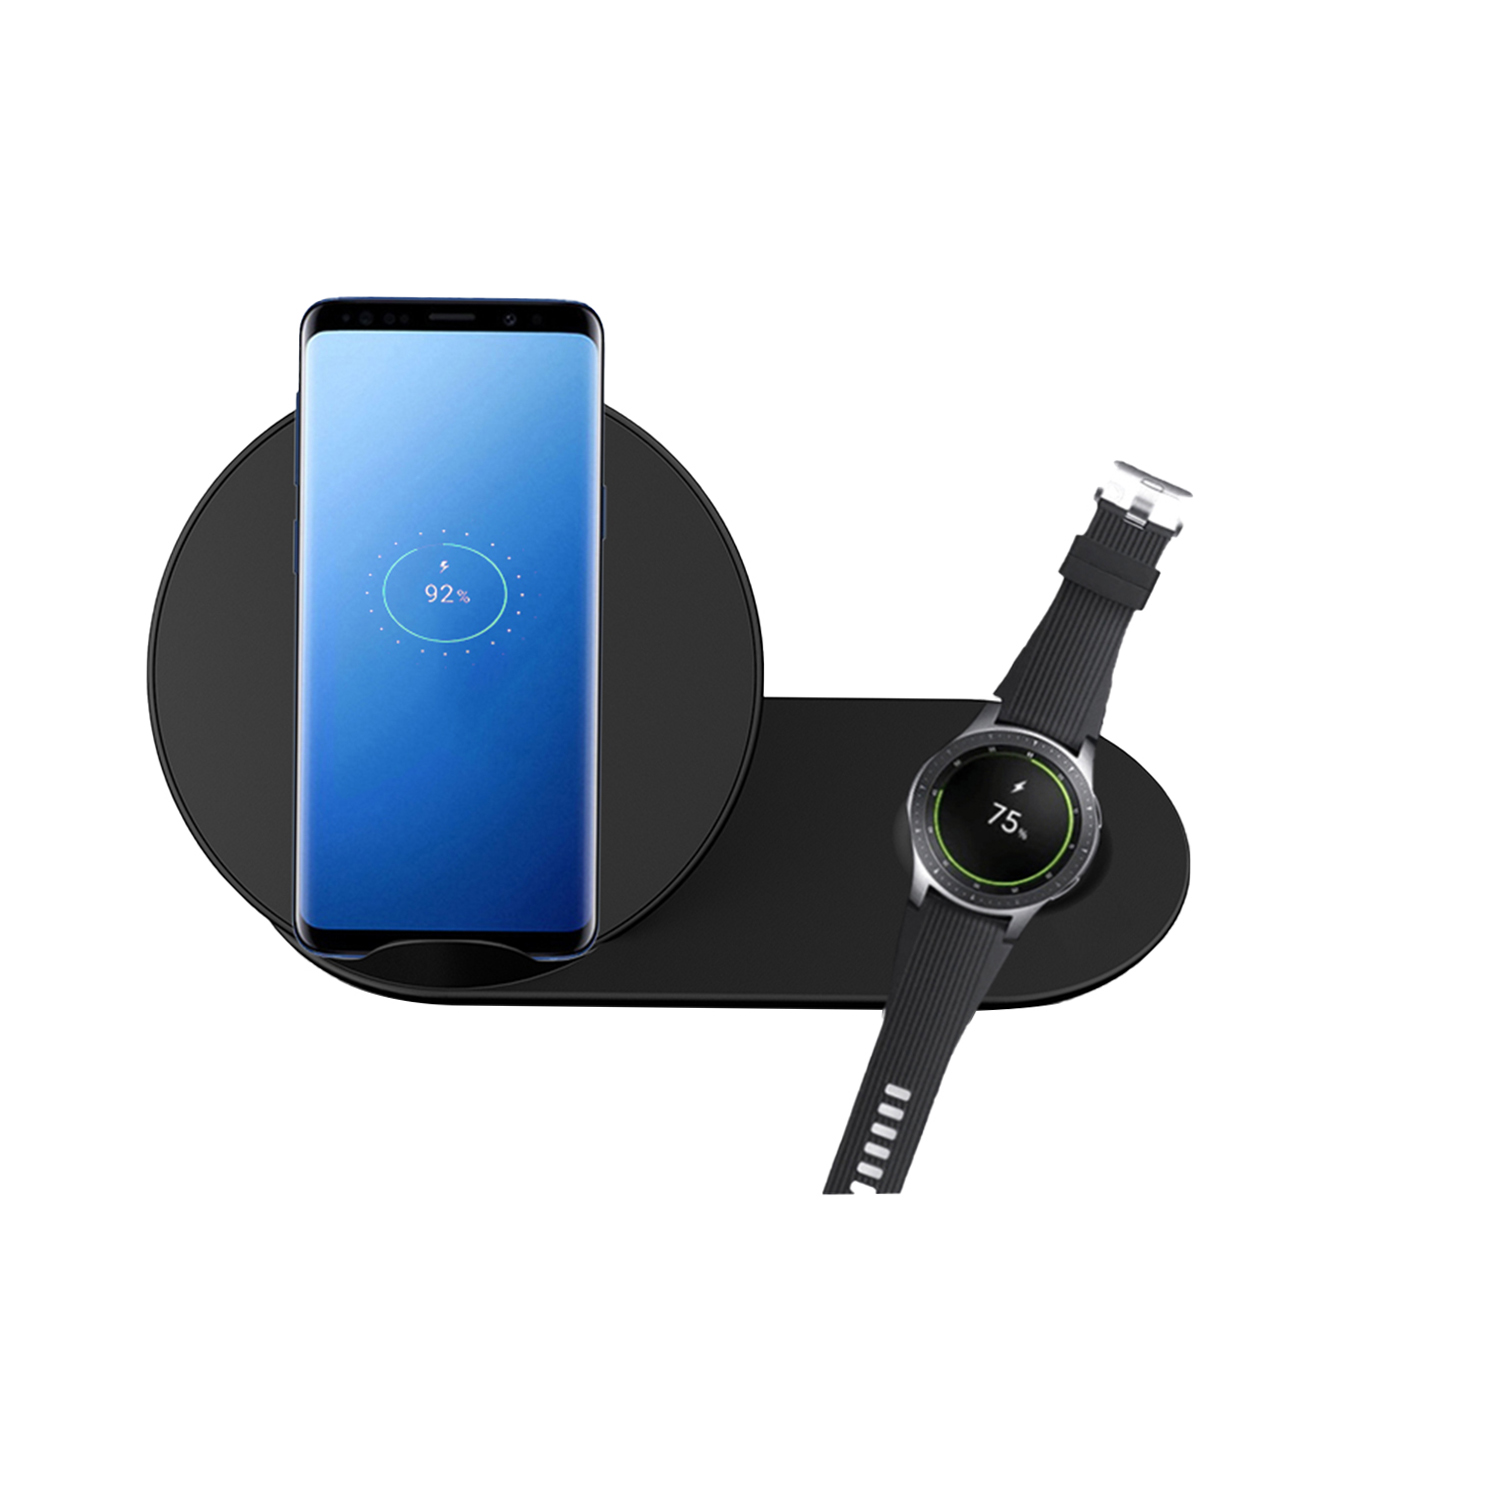 Shenzhen New Design 2 in 1 Wireless Charging Pad for iPhone XS Max/XS/XR/X/8 Plus and Samsung Galaxy S9/S8 and Compatible with Samsung Watches(MH-Q440B)